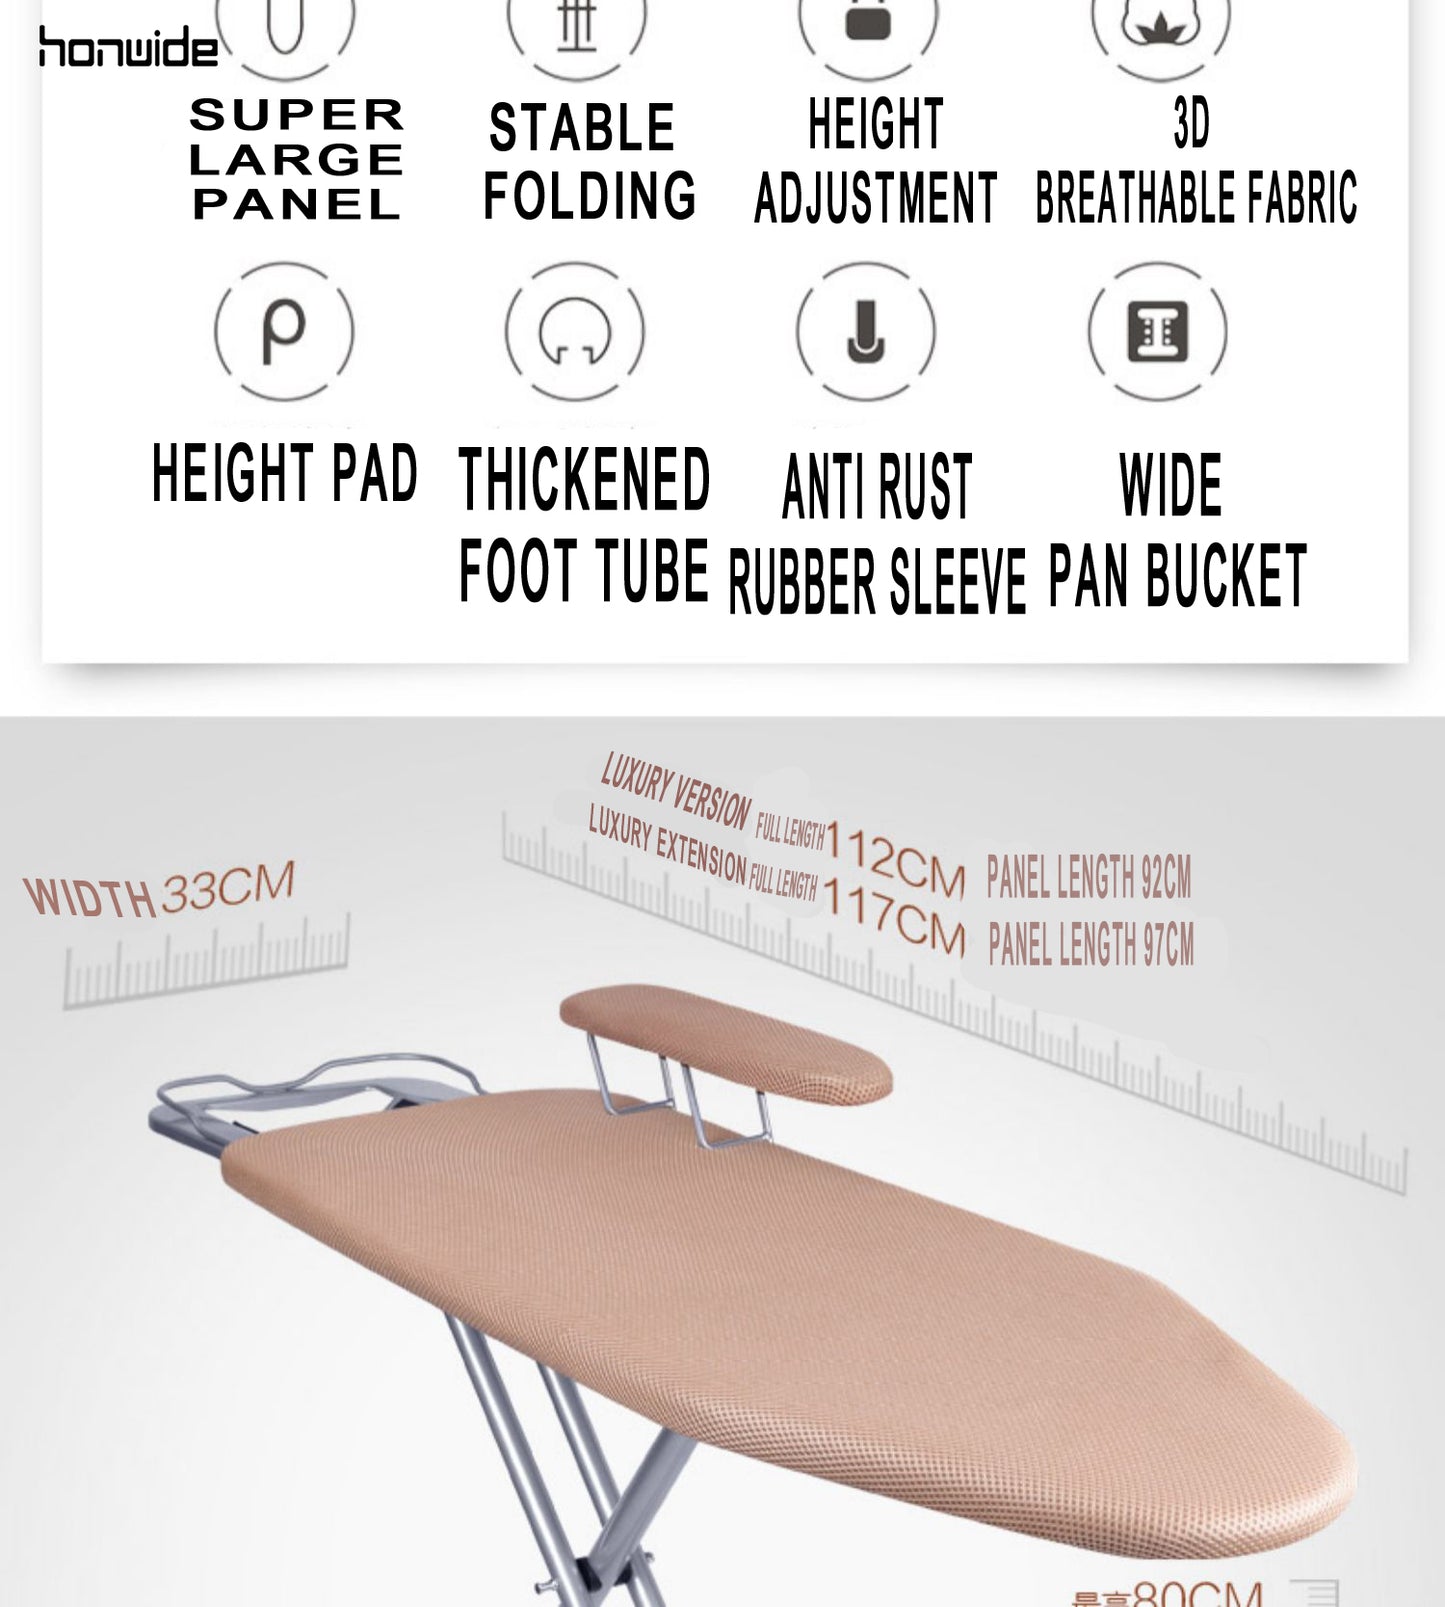 3D breathable household ironing board folding ironing table